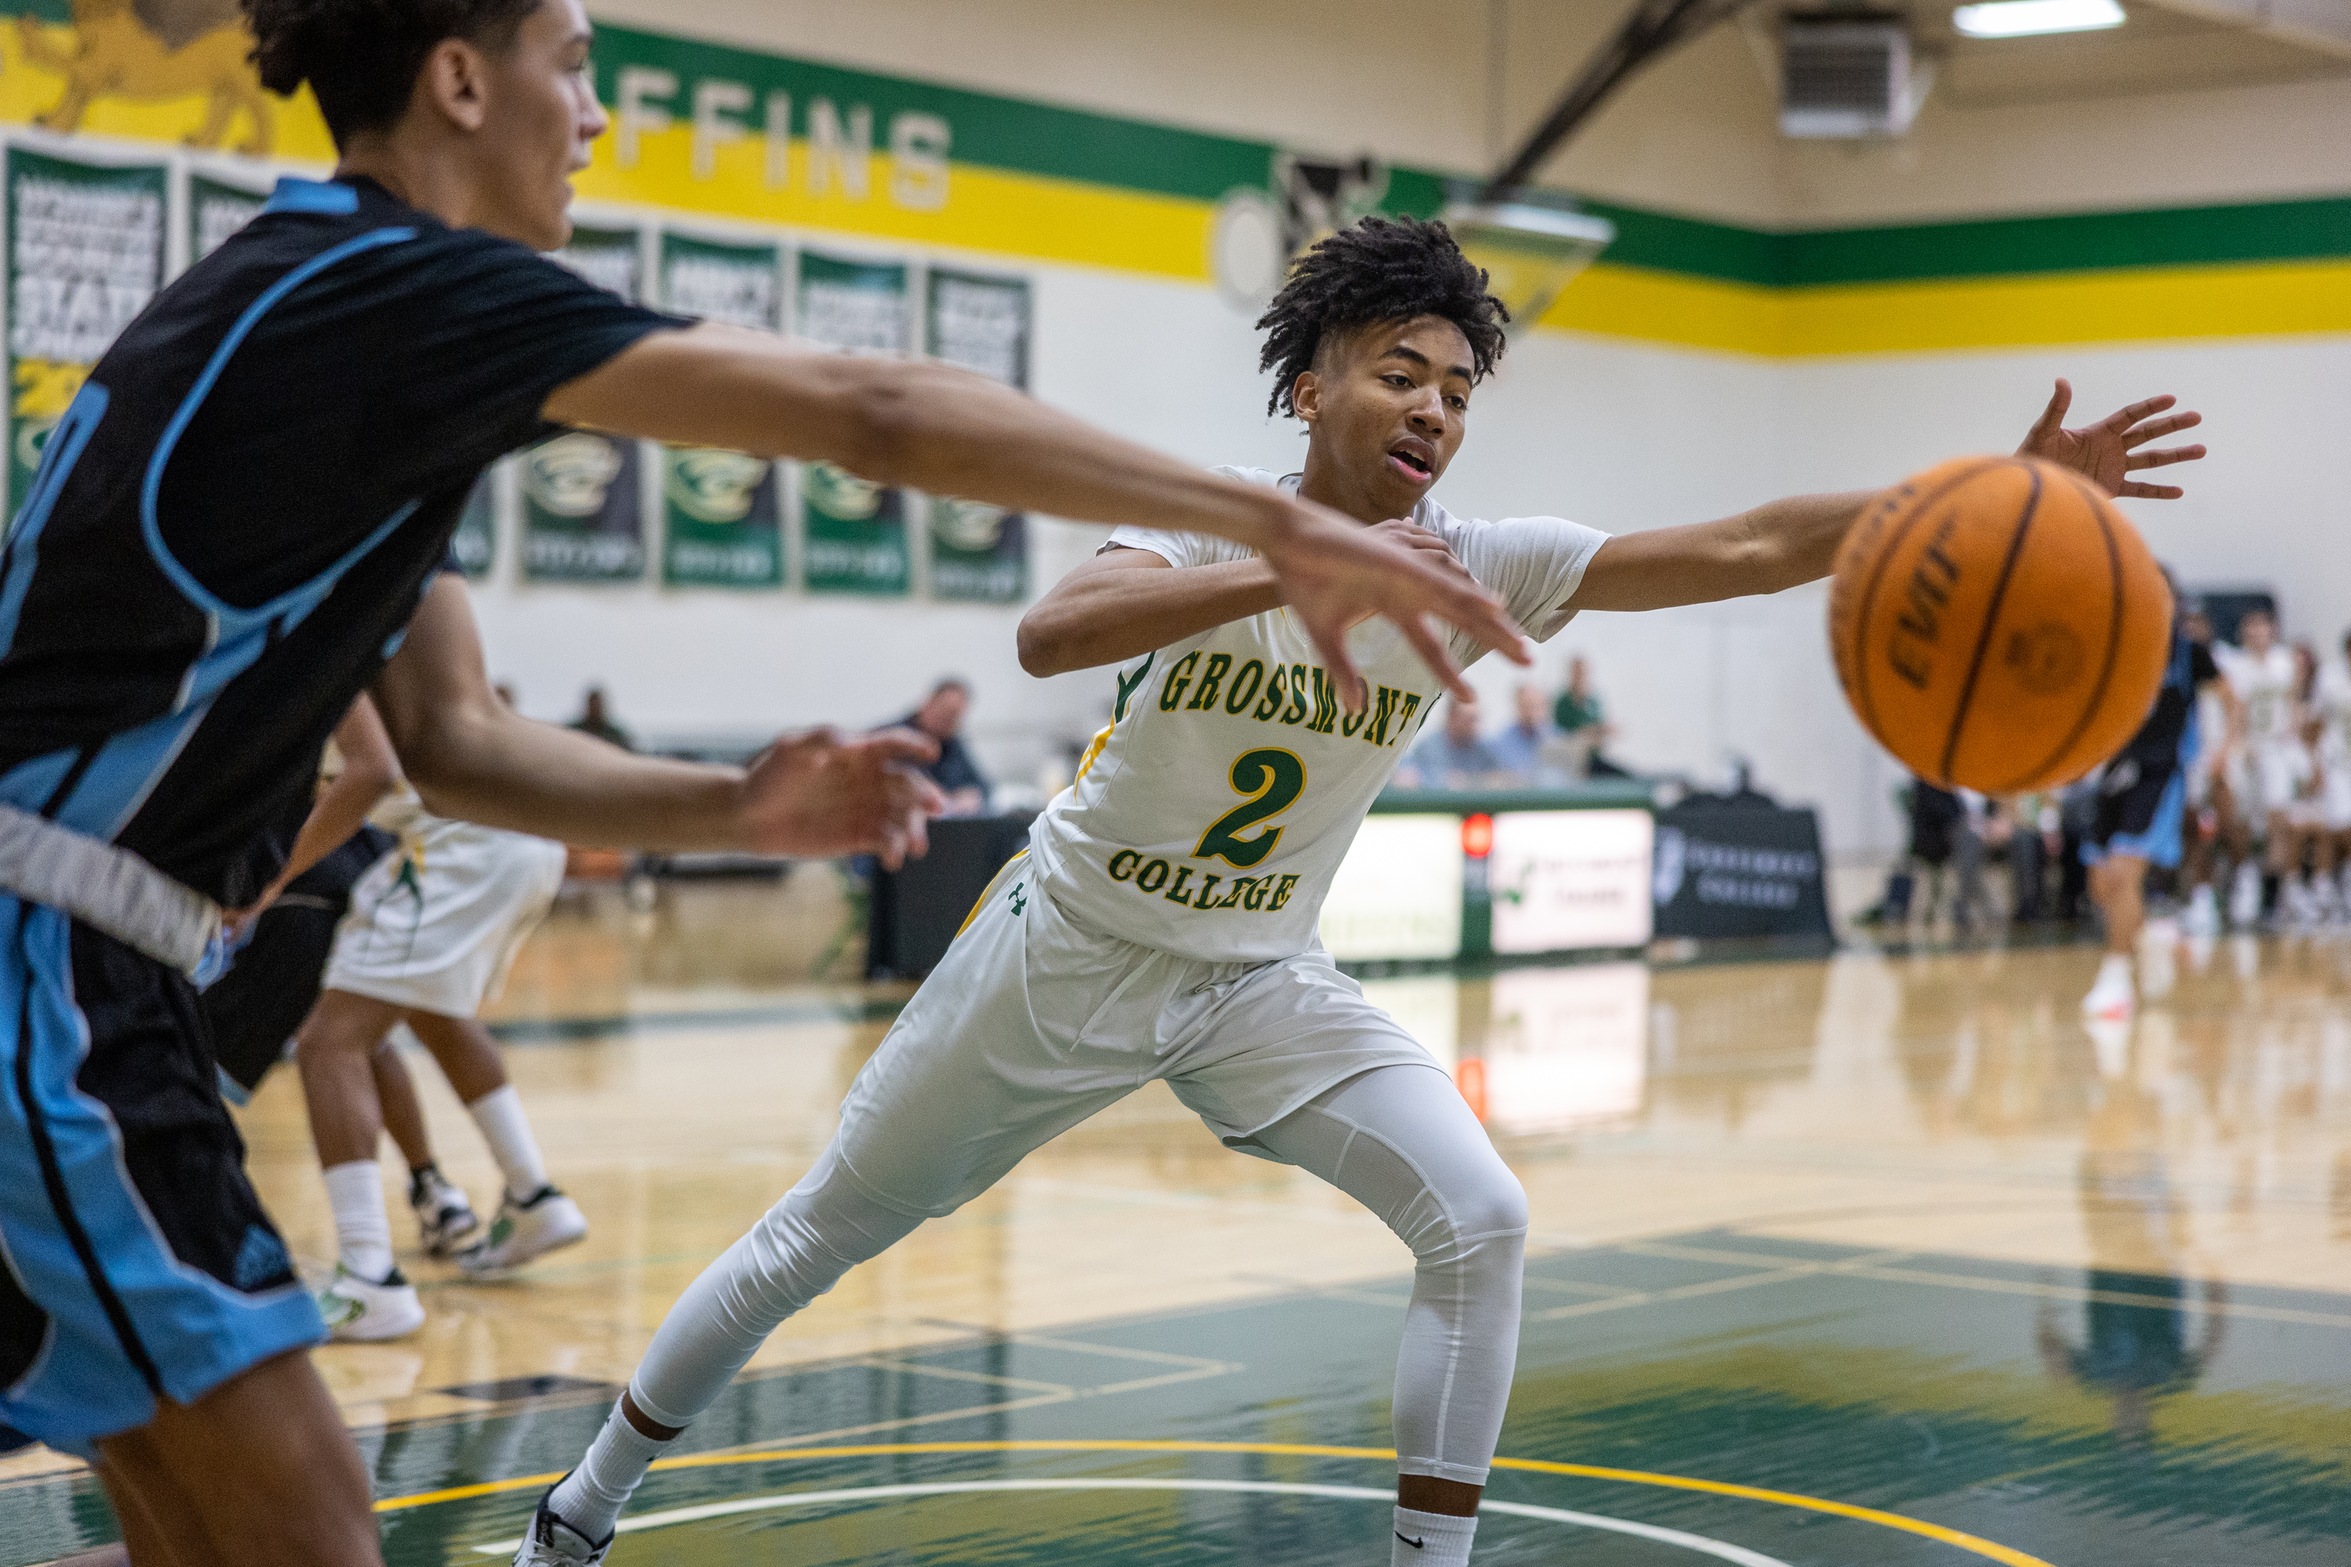 Tyrone Lester Jr. reaches for the ball against Cuyamaca (1/13/2023).  Photo Courtesy of P.J. Panebianco (@vanillagorillaphotography on Instagram).